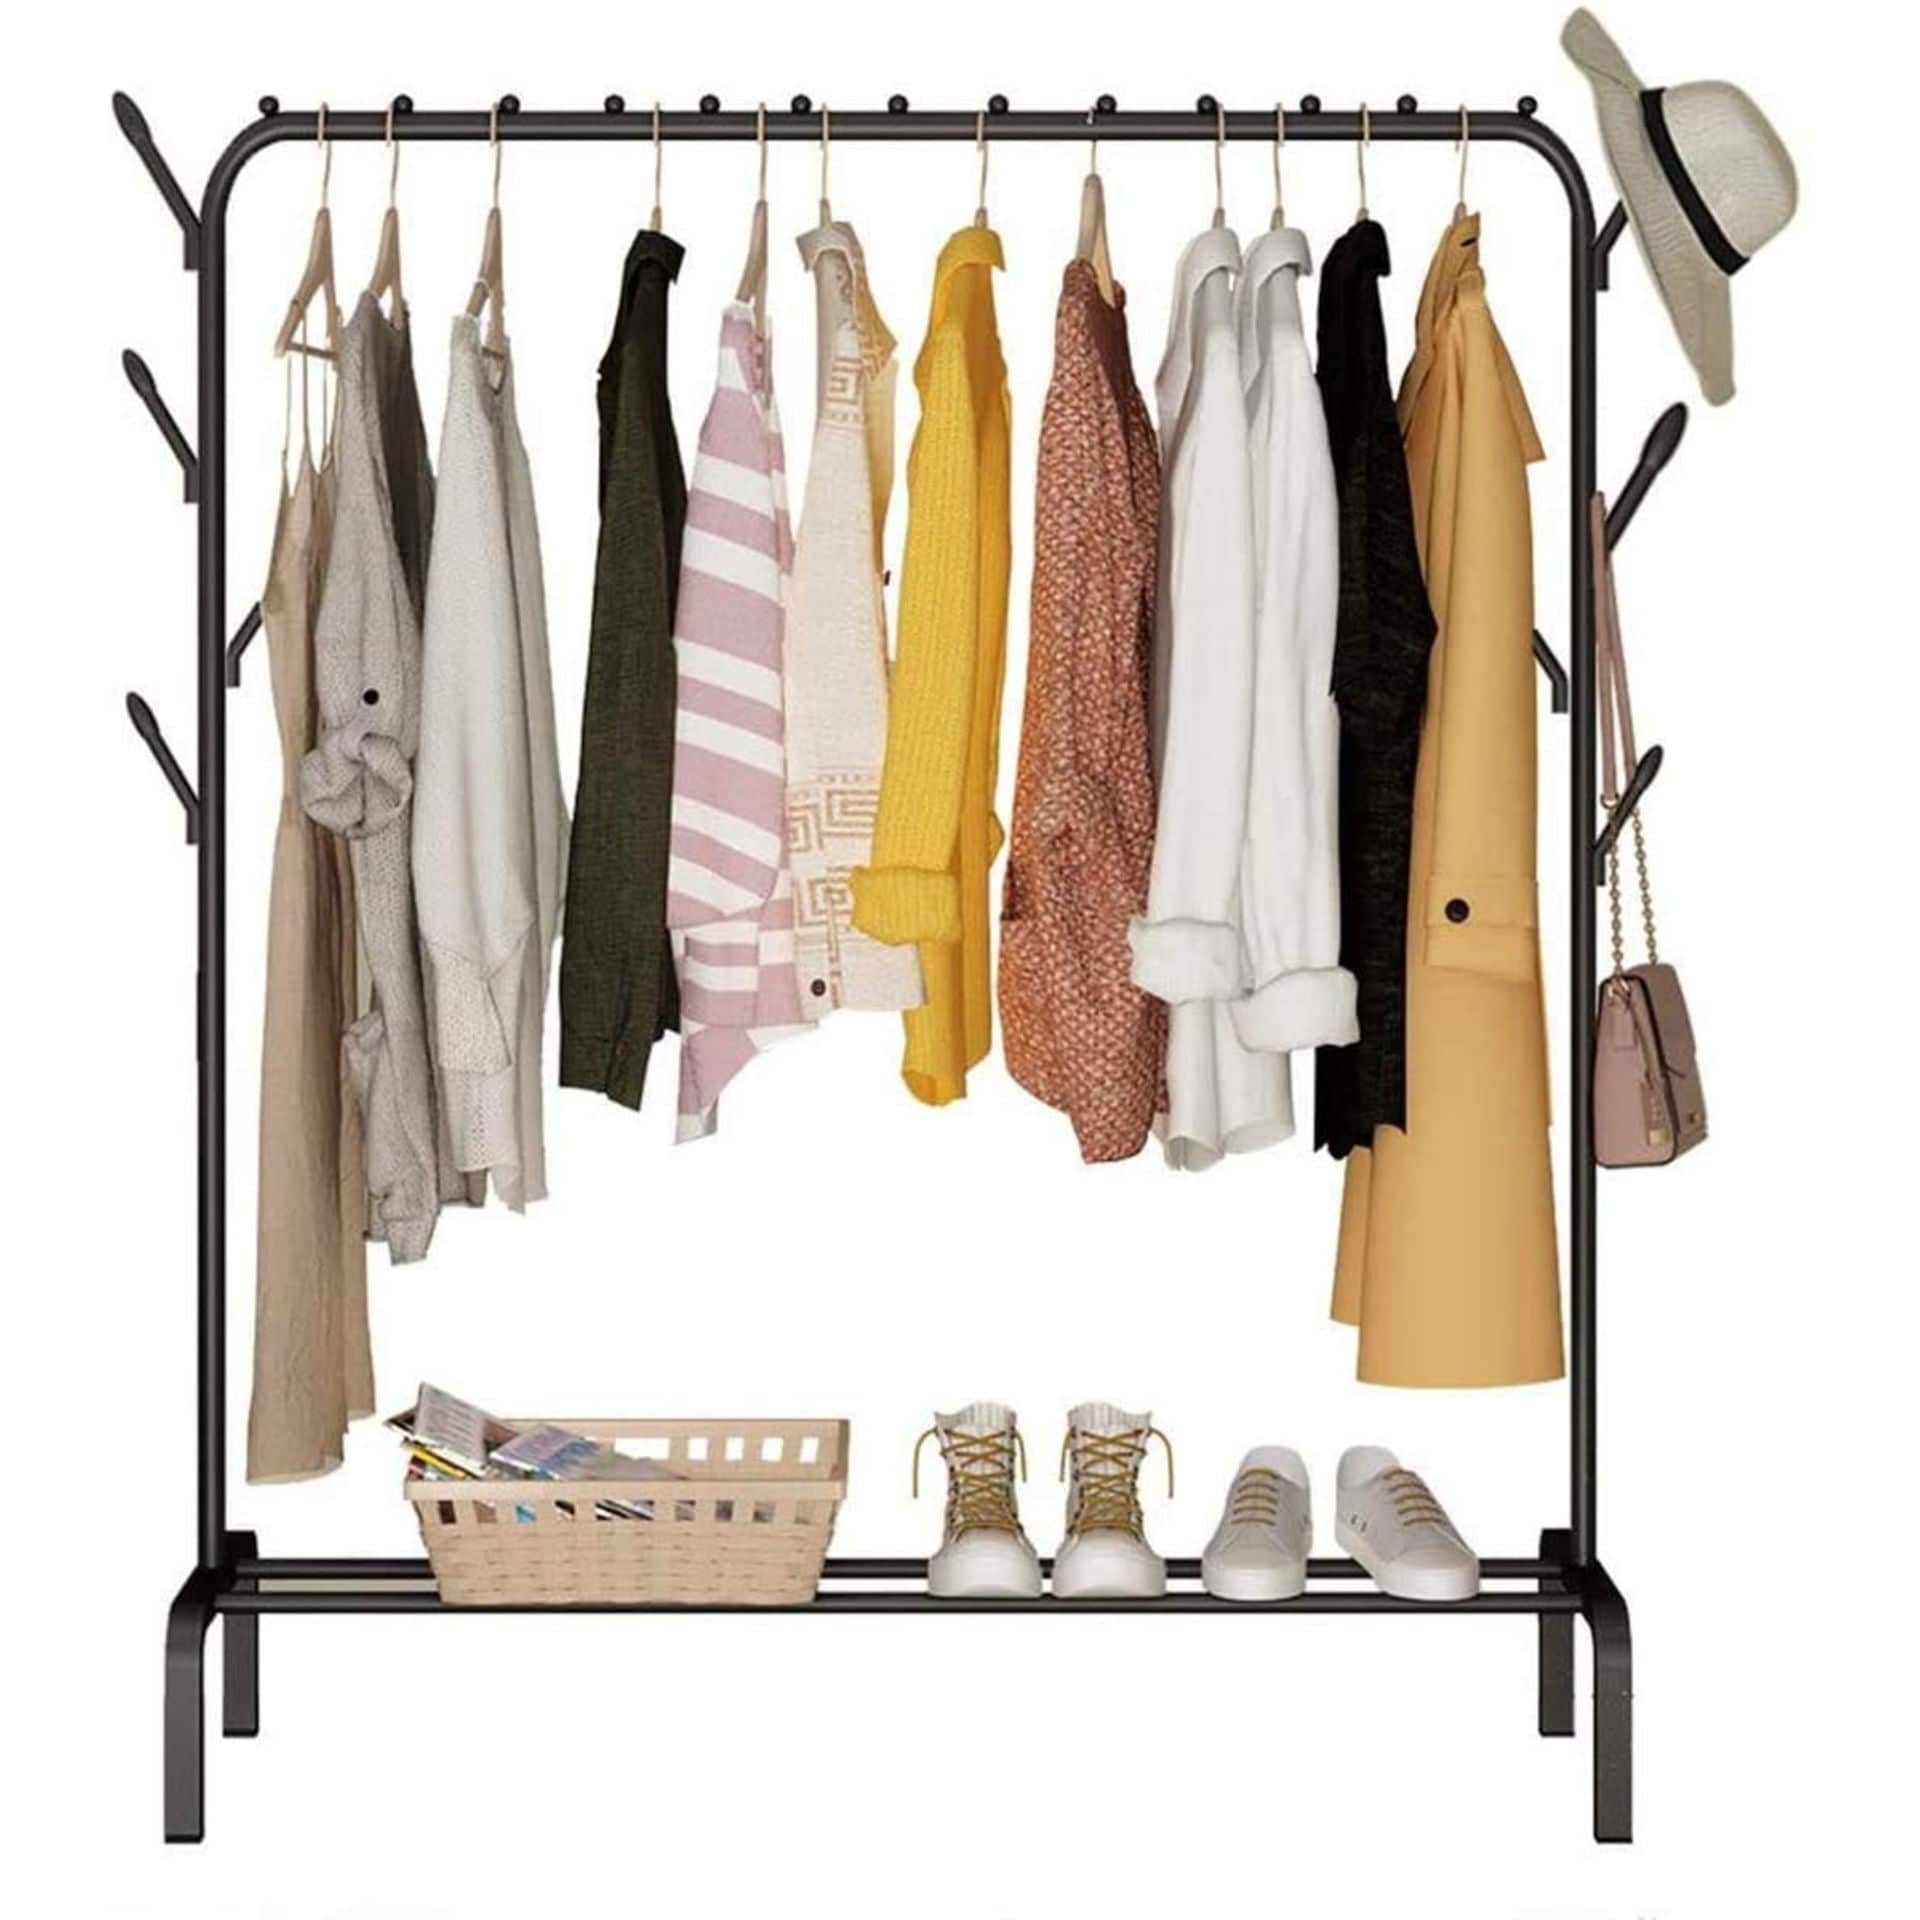 https://assets.dragonmart.ae/pictures/0376601_showay-cloth-rack-black.jpeg